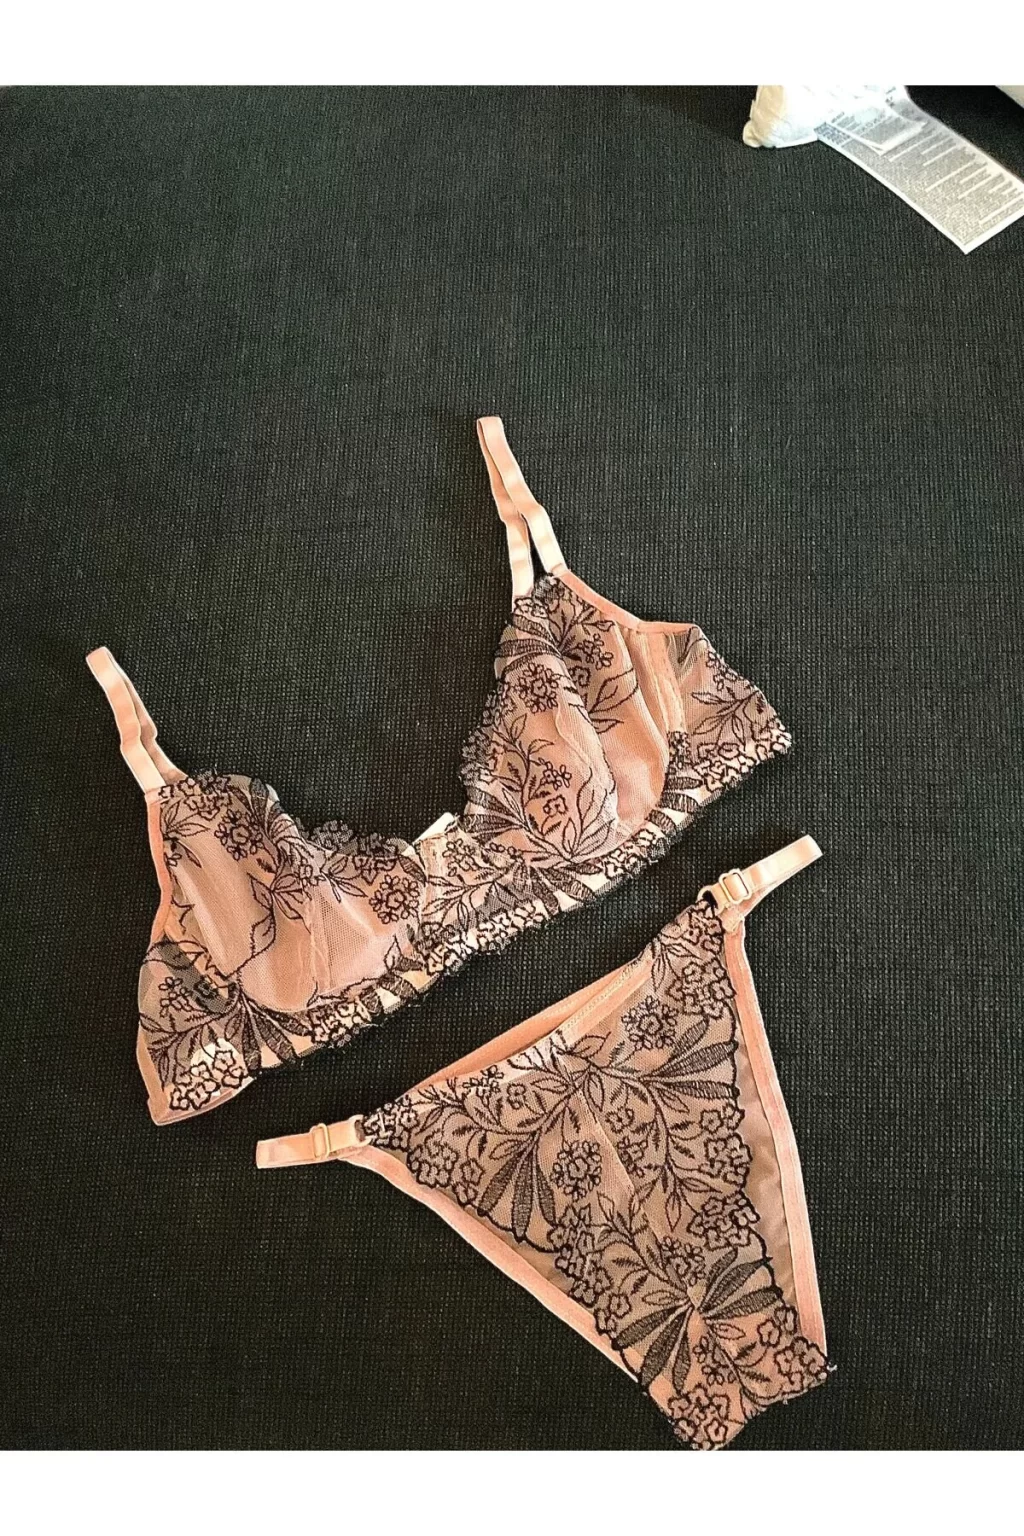 Butterfly Collection Blog - Life in Big Boobs: Bra School: Not all